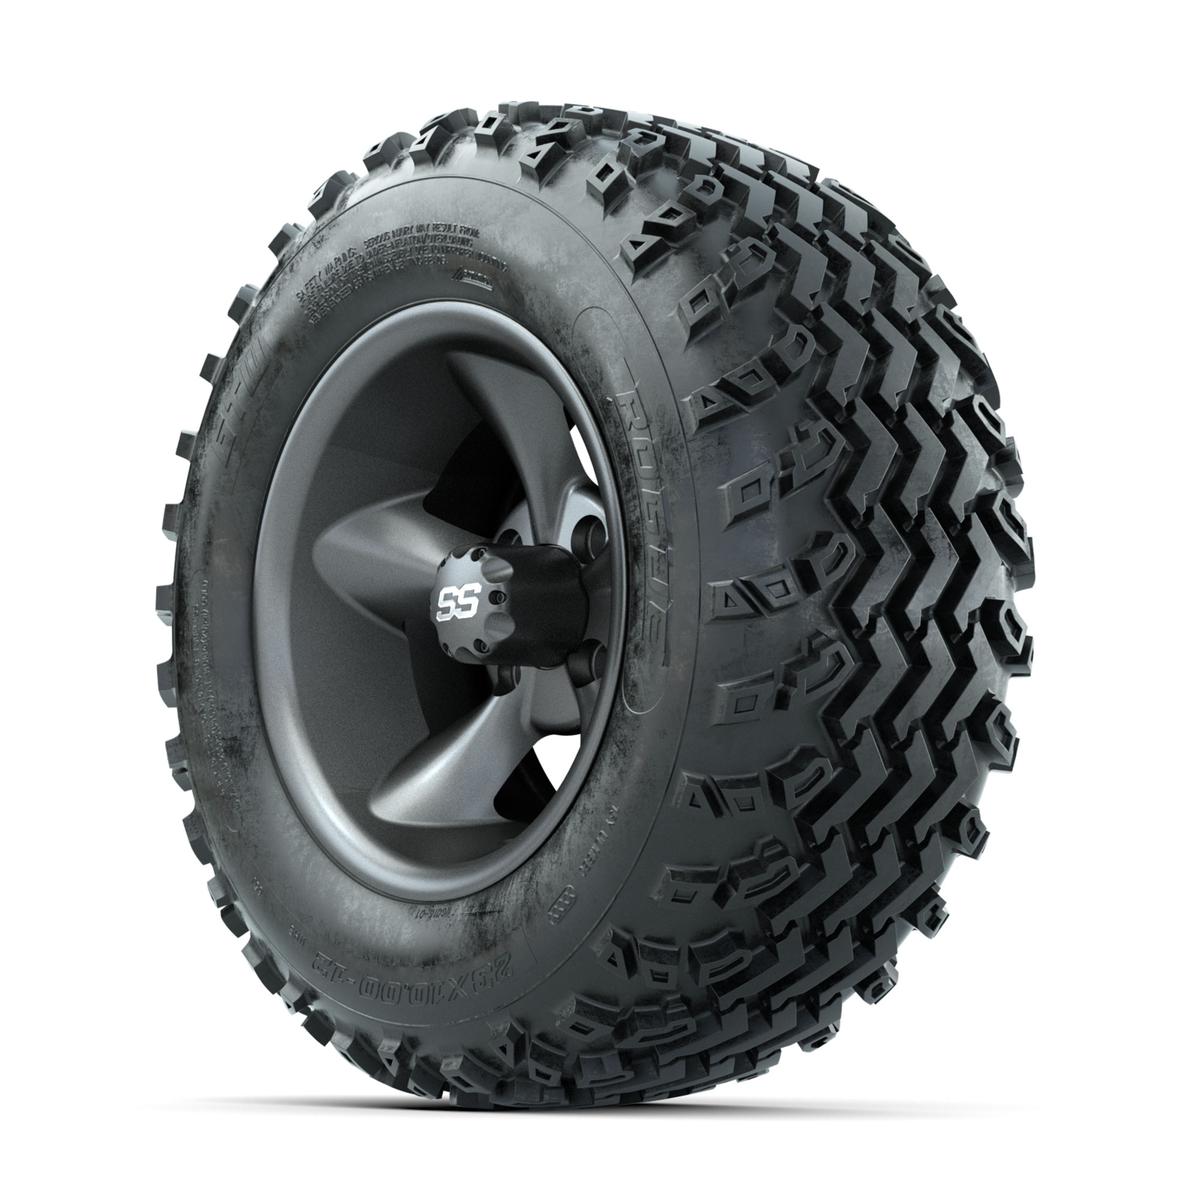 GTW Godfather Matte Grey 12 in Wheels with 23x10.00-12 Rogue All Terrain Tires – Full Set